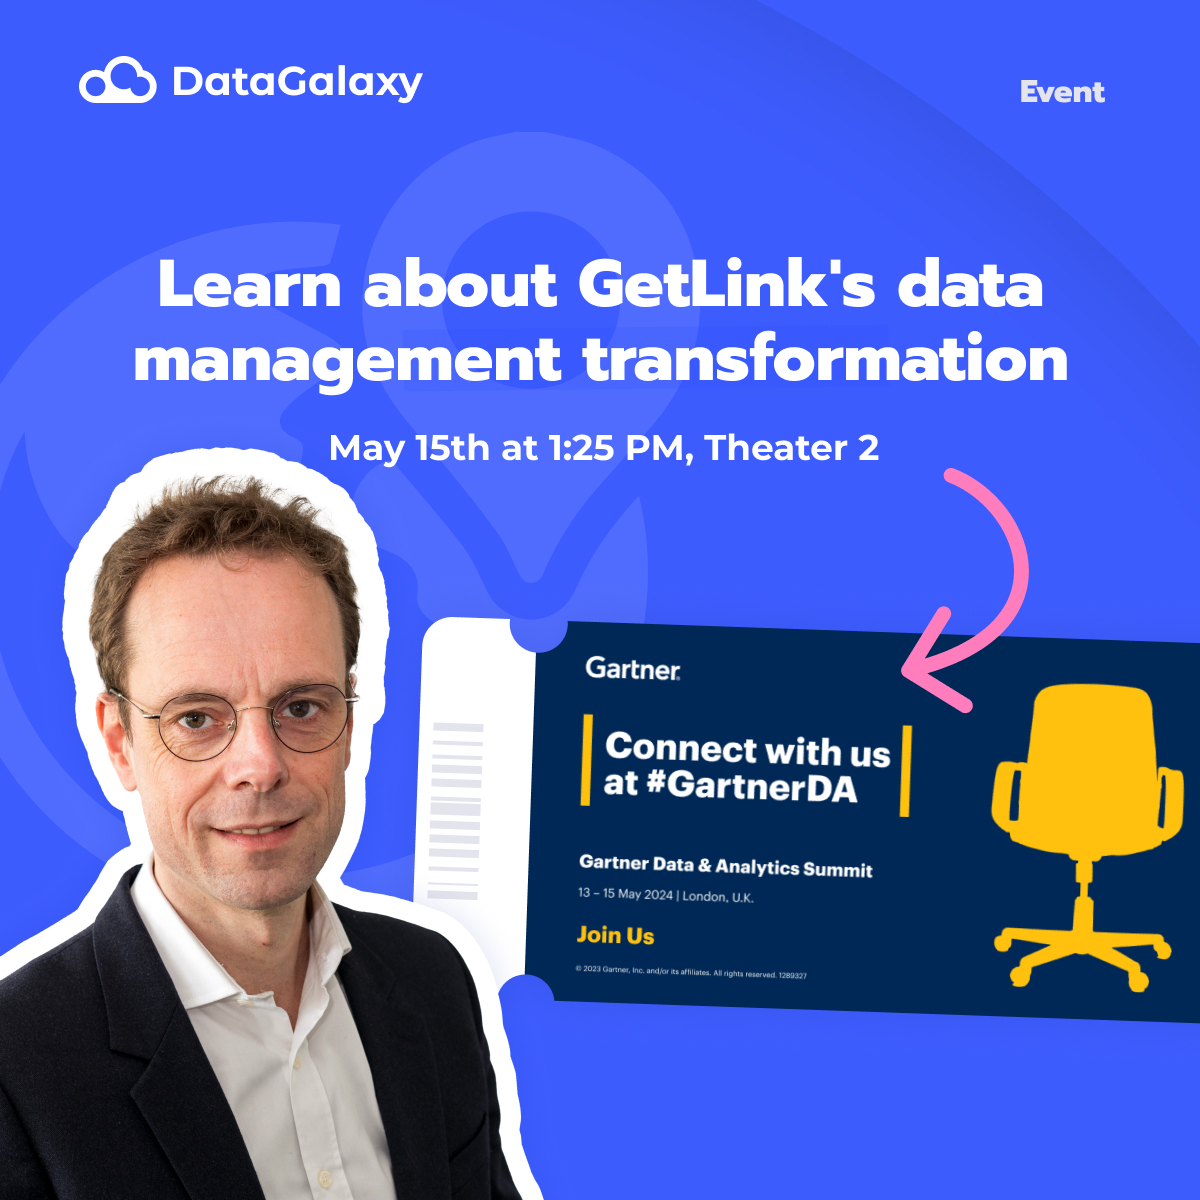 If you are attending #GartnerDA today, join us at 1:25pm in theater 2 for a keynote with @GetlinkGroup's Denis Coutrot. See you there!